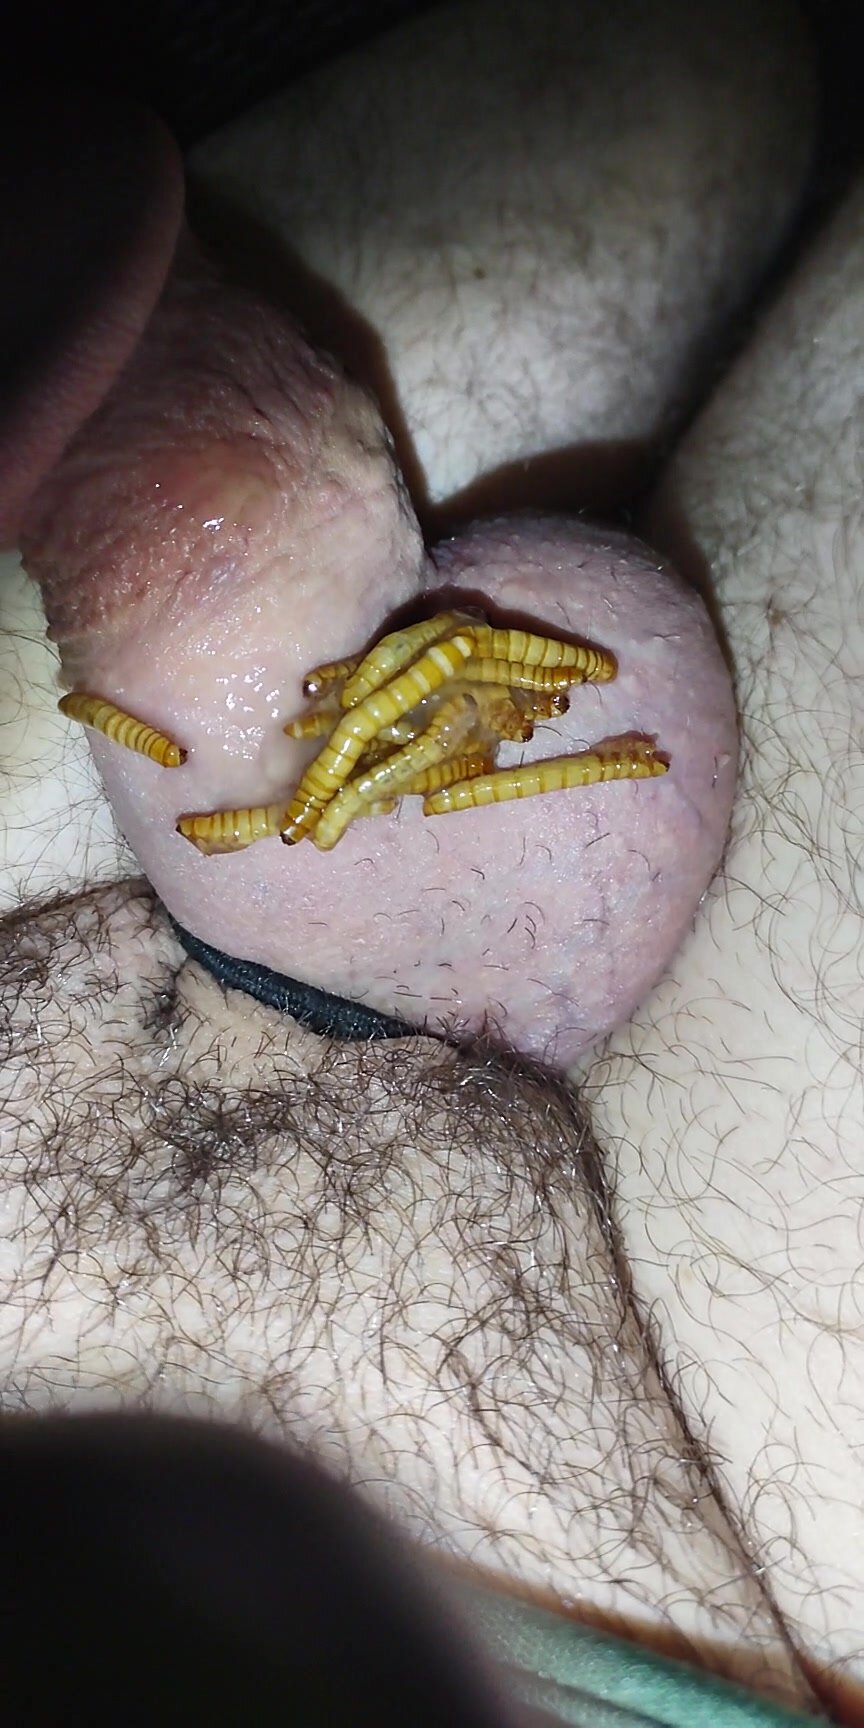 Dickworm as Requested